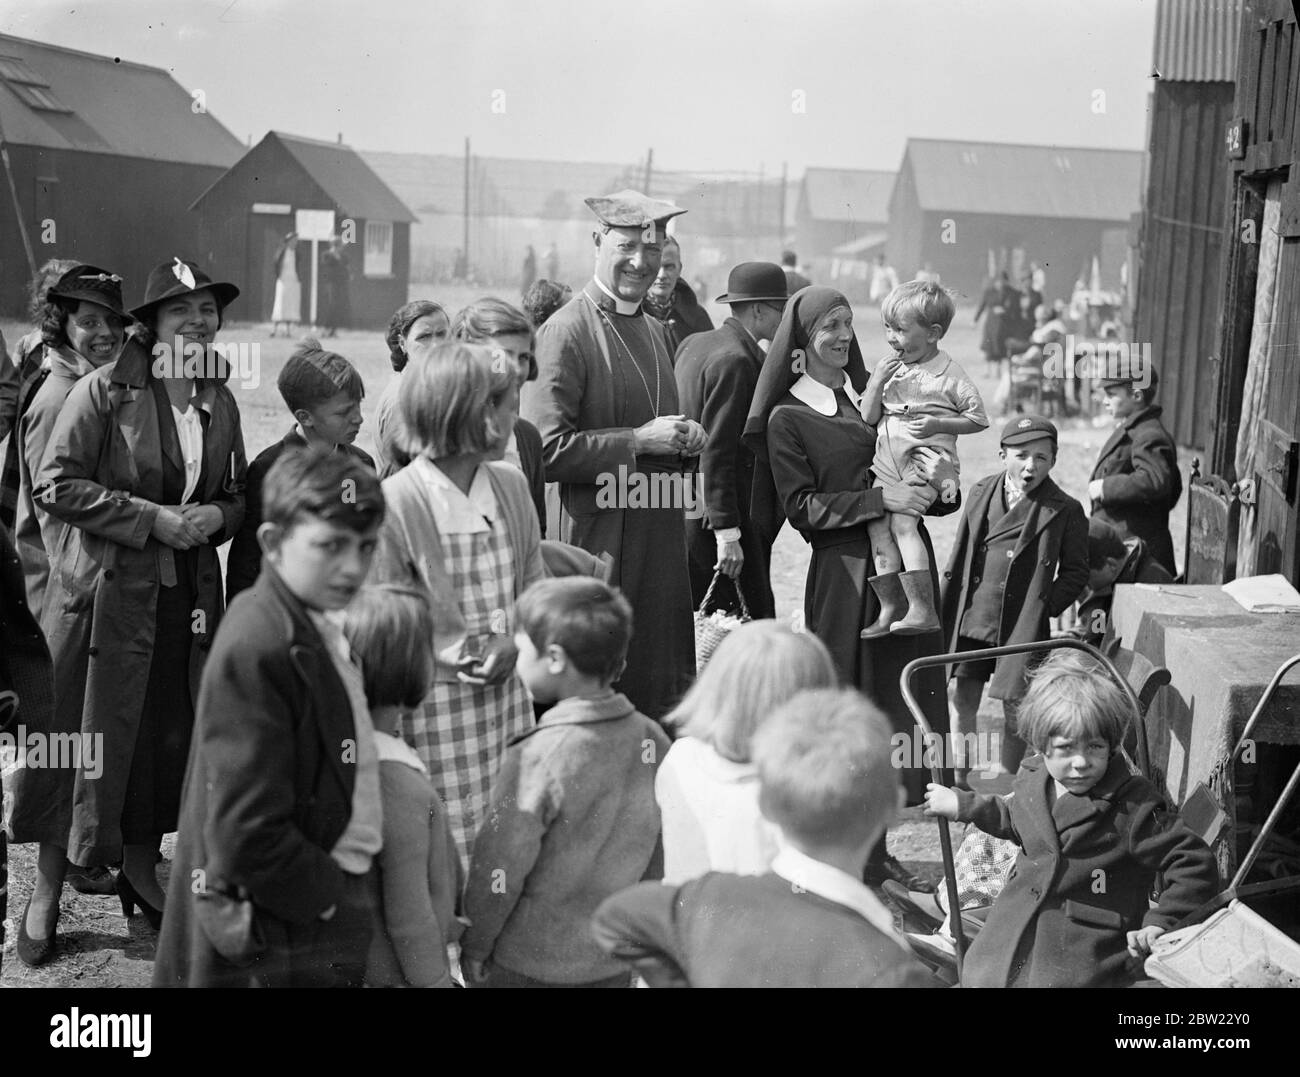 Dr Linton Smith the Bishop of Rochester paid the annual visit to the Kentish hop fields and health services for the pickers, at Crowhurst farm, East Peckham, Kent. 12 September 1937. Stock Photo